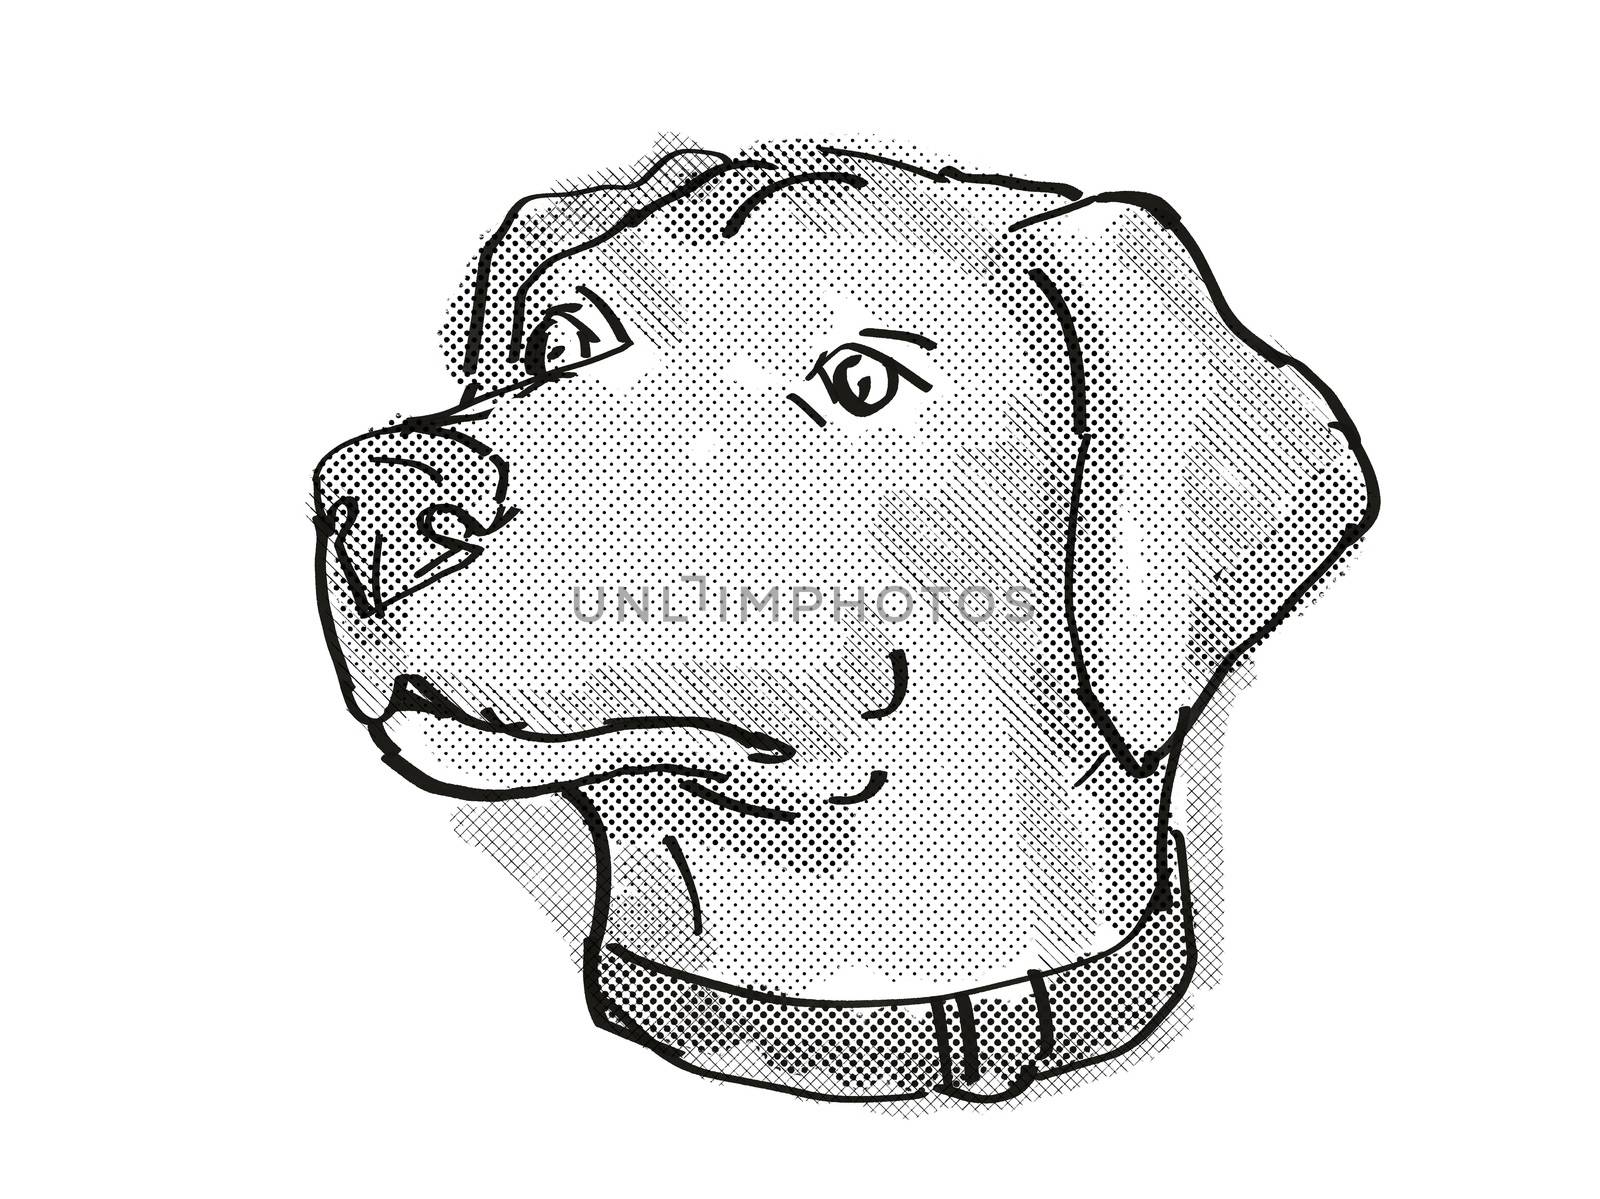 Retro cartoon style drawing of head of a Blue Lacy, also called the Lacy Dog  , a domestic dog or canine breed on isolated white background done in black and white.